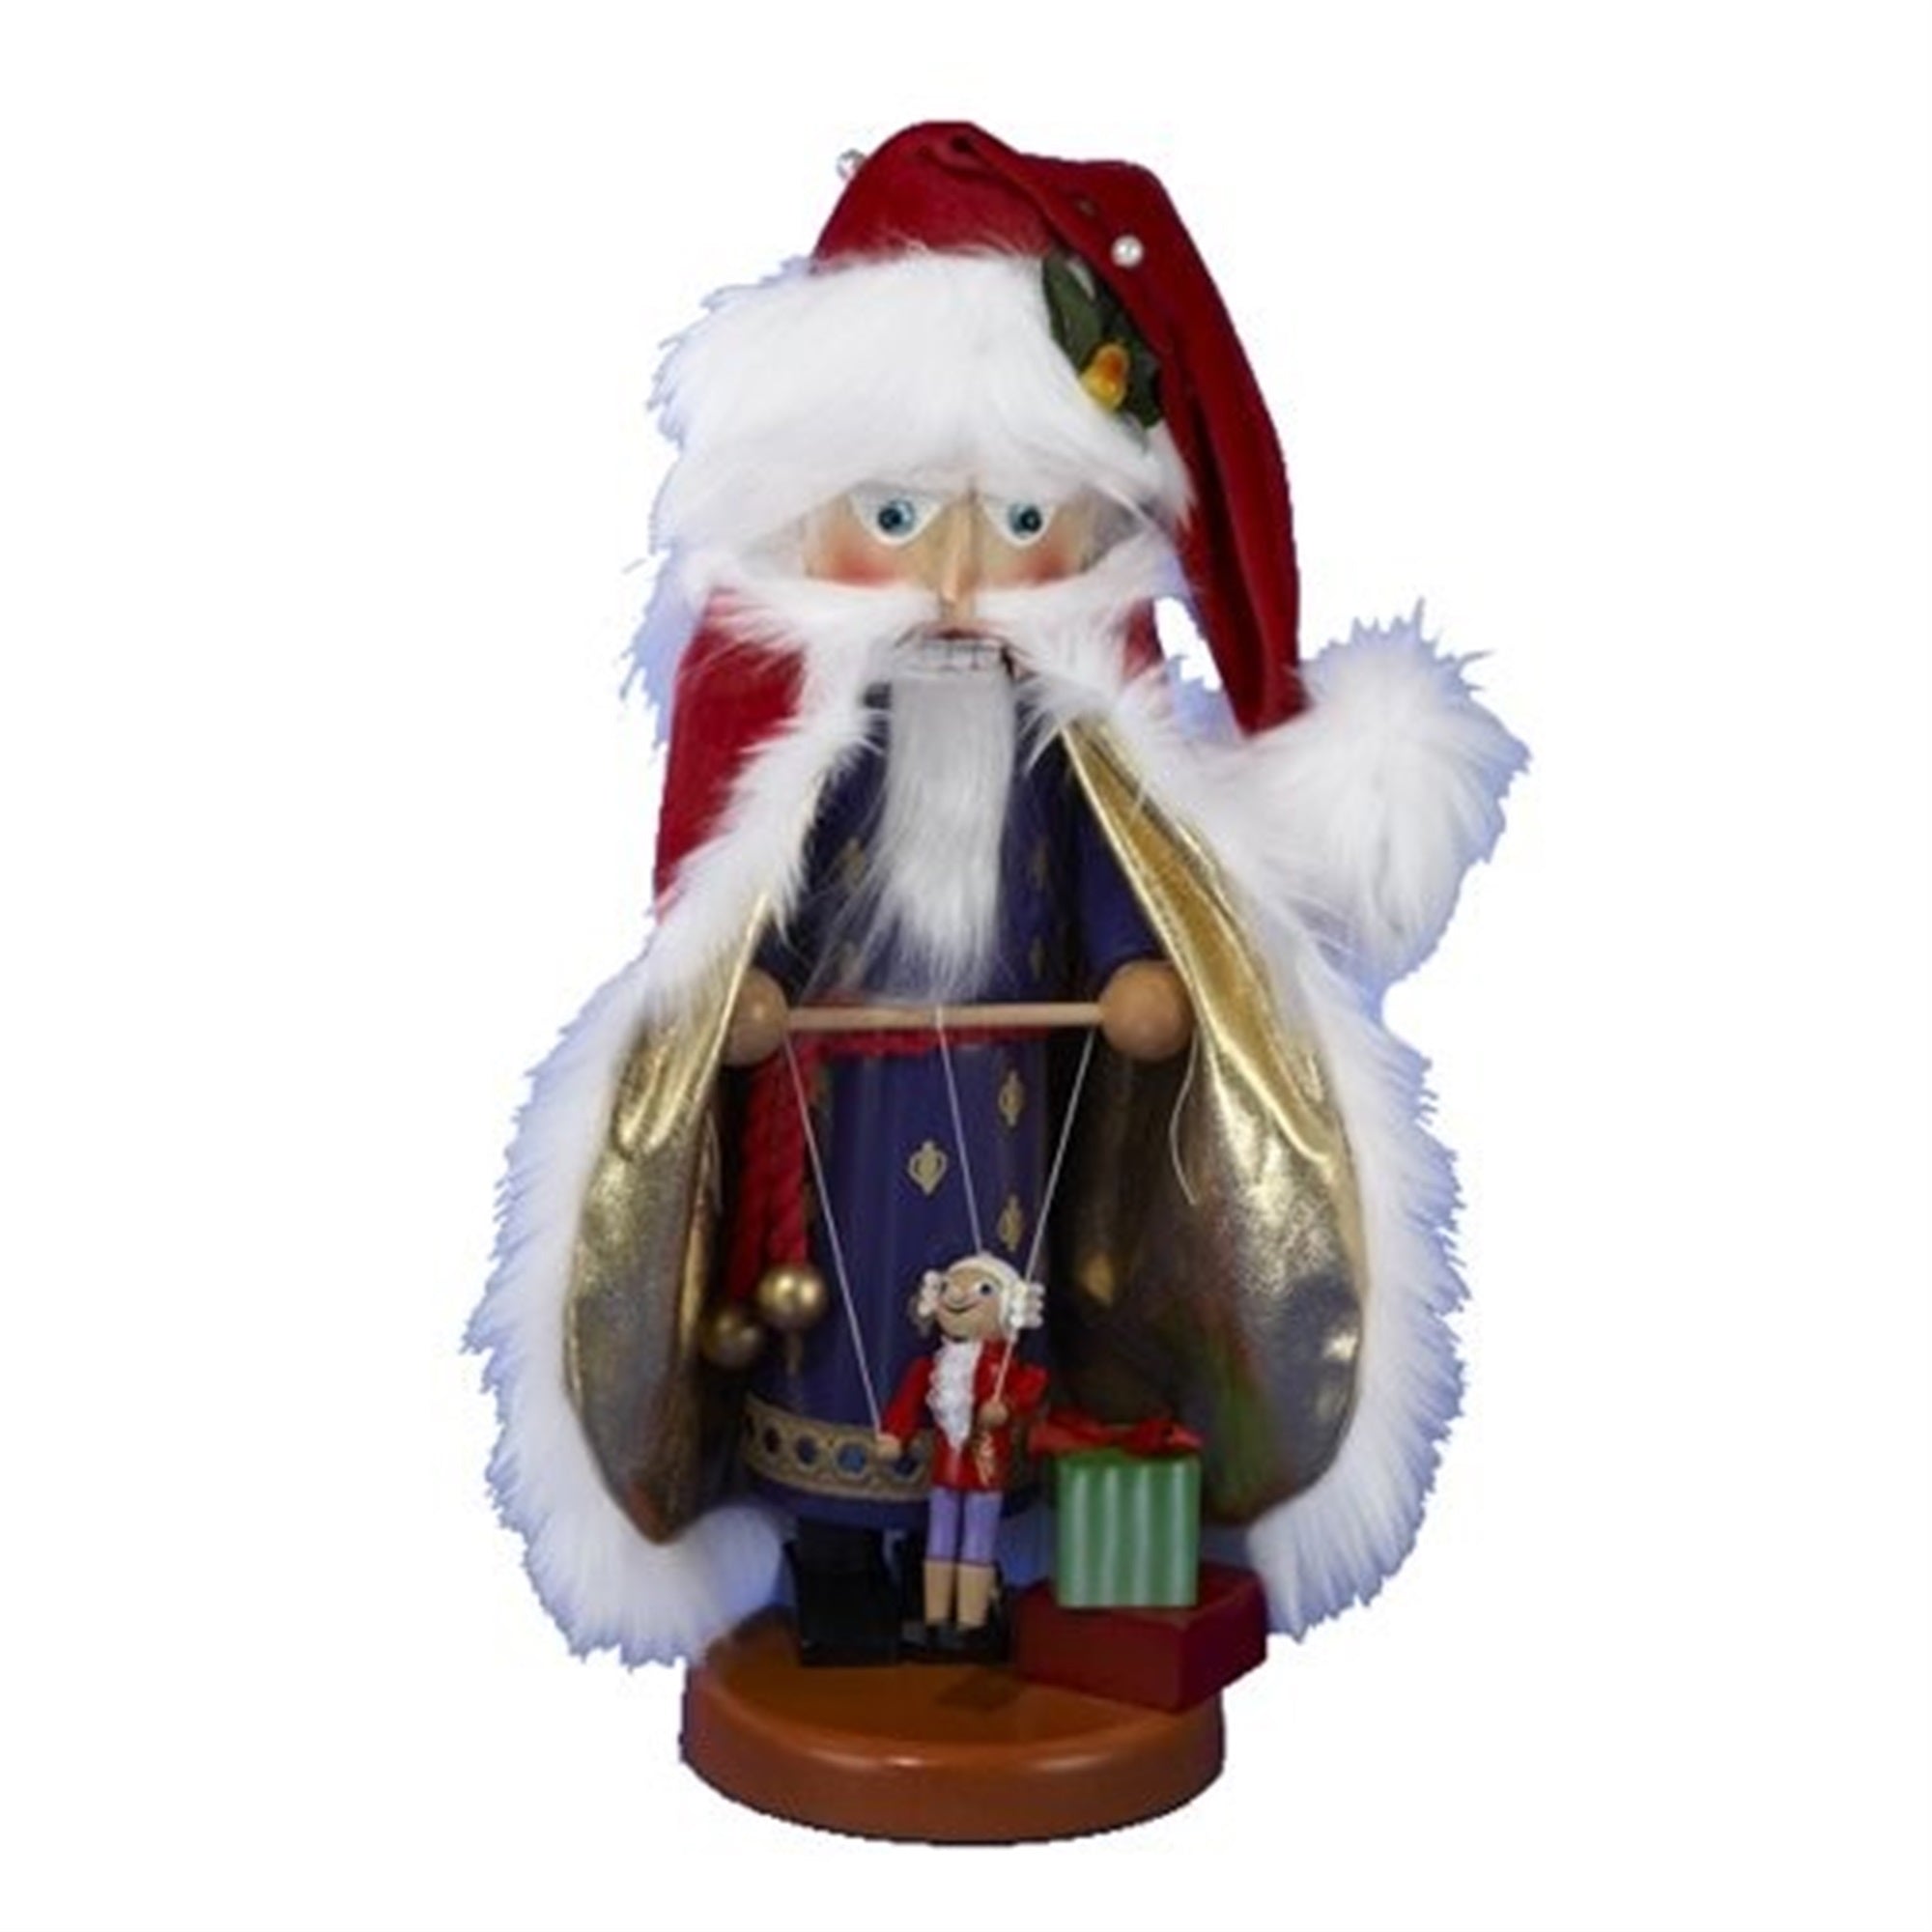 Steinbach Twelve Days of Christmas Series, Limited Edition Musical Nutcracker, Ten Lords A Leaping, 18"